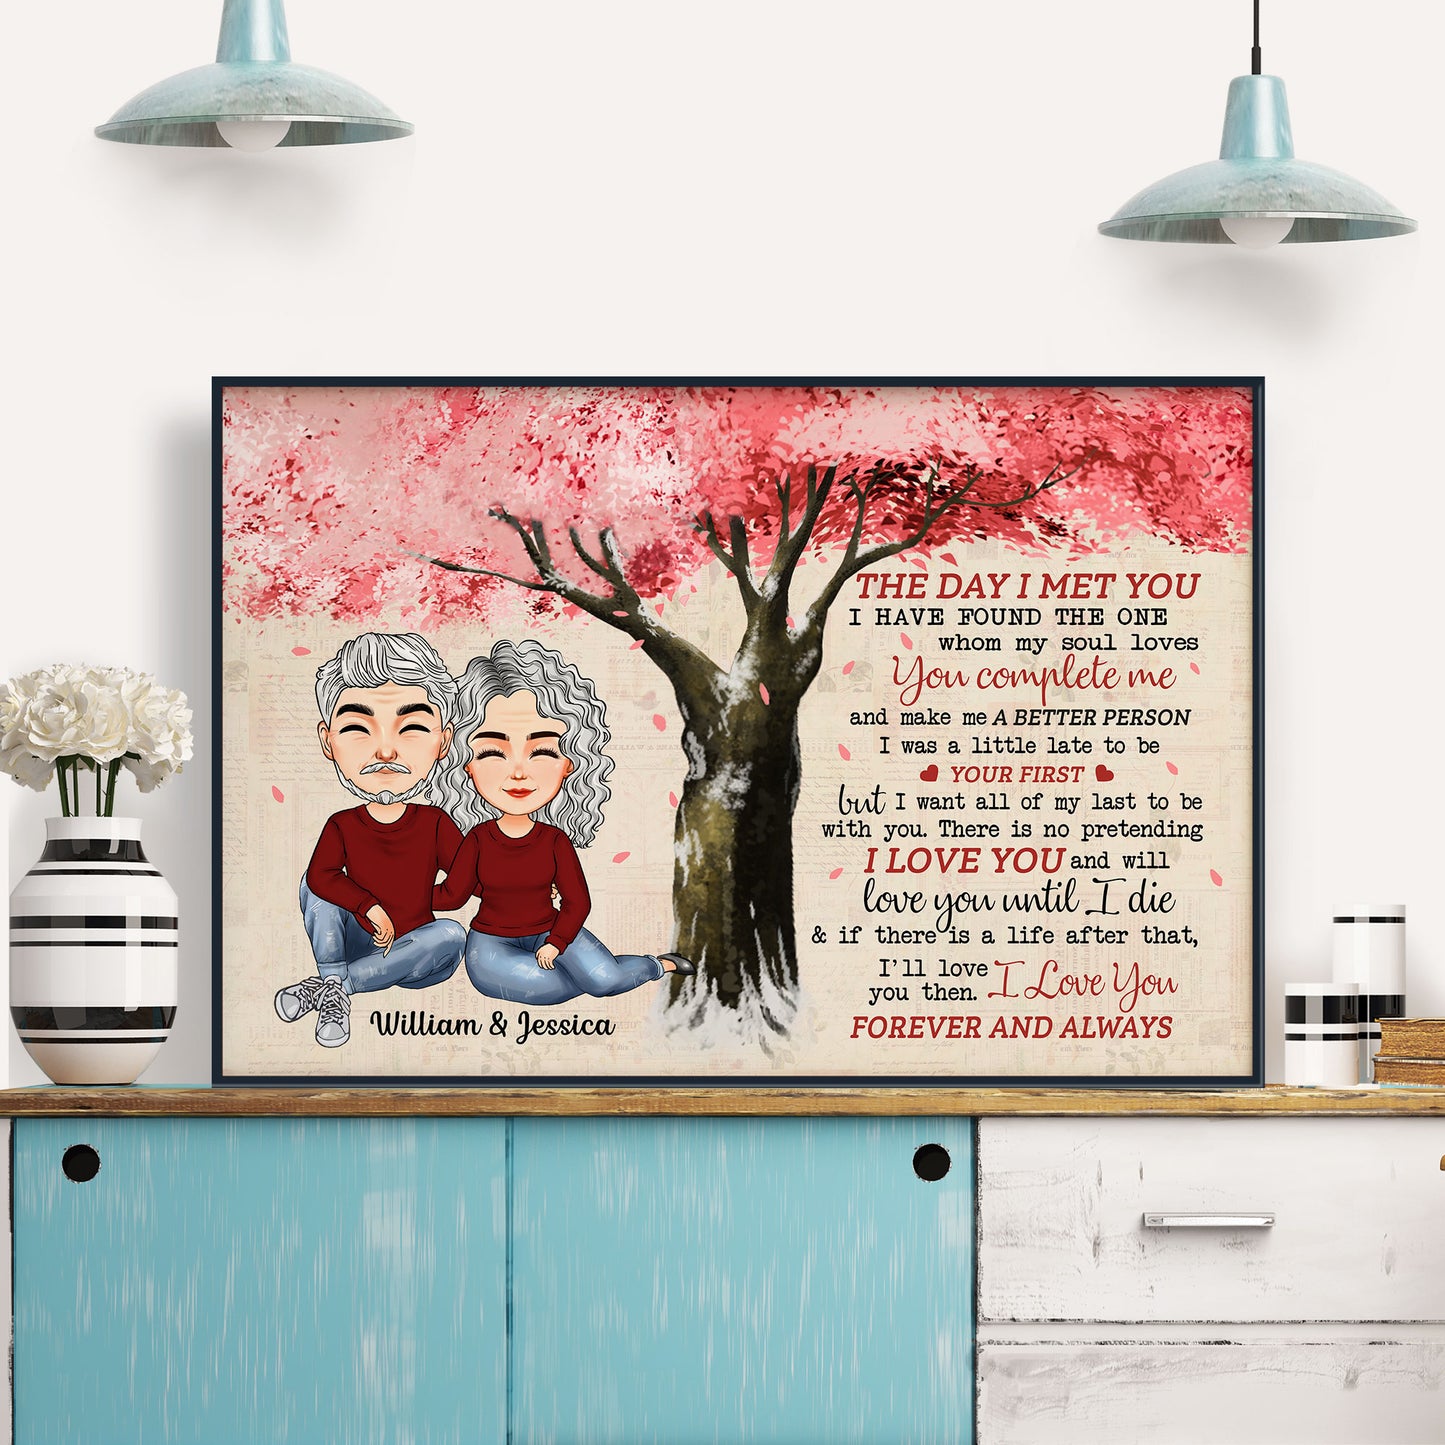 The Day I Met You - Personalized Poster/Canvas - Anniversary, Valentine, Birthday Gift For Life Partner, Husband & Wife, Couples